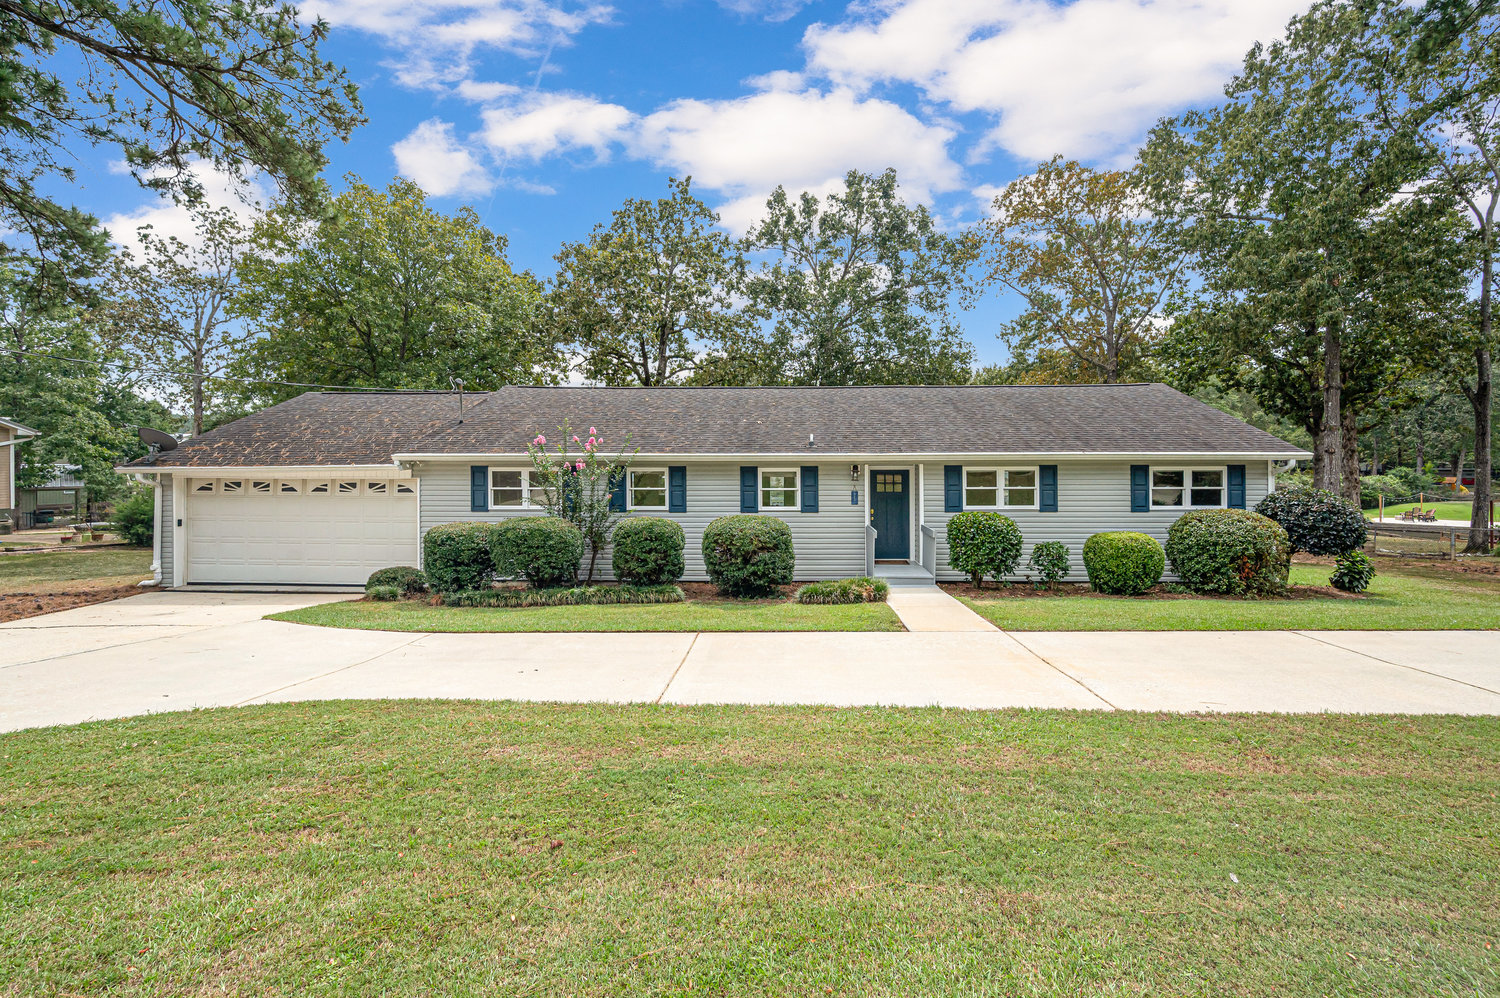 Virtual Tour of Birmingham Metro Real Estate Listing For Sale | 311 South River Drive, Shelby, AL 35143